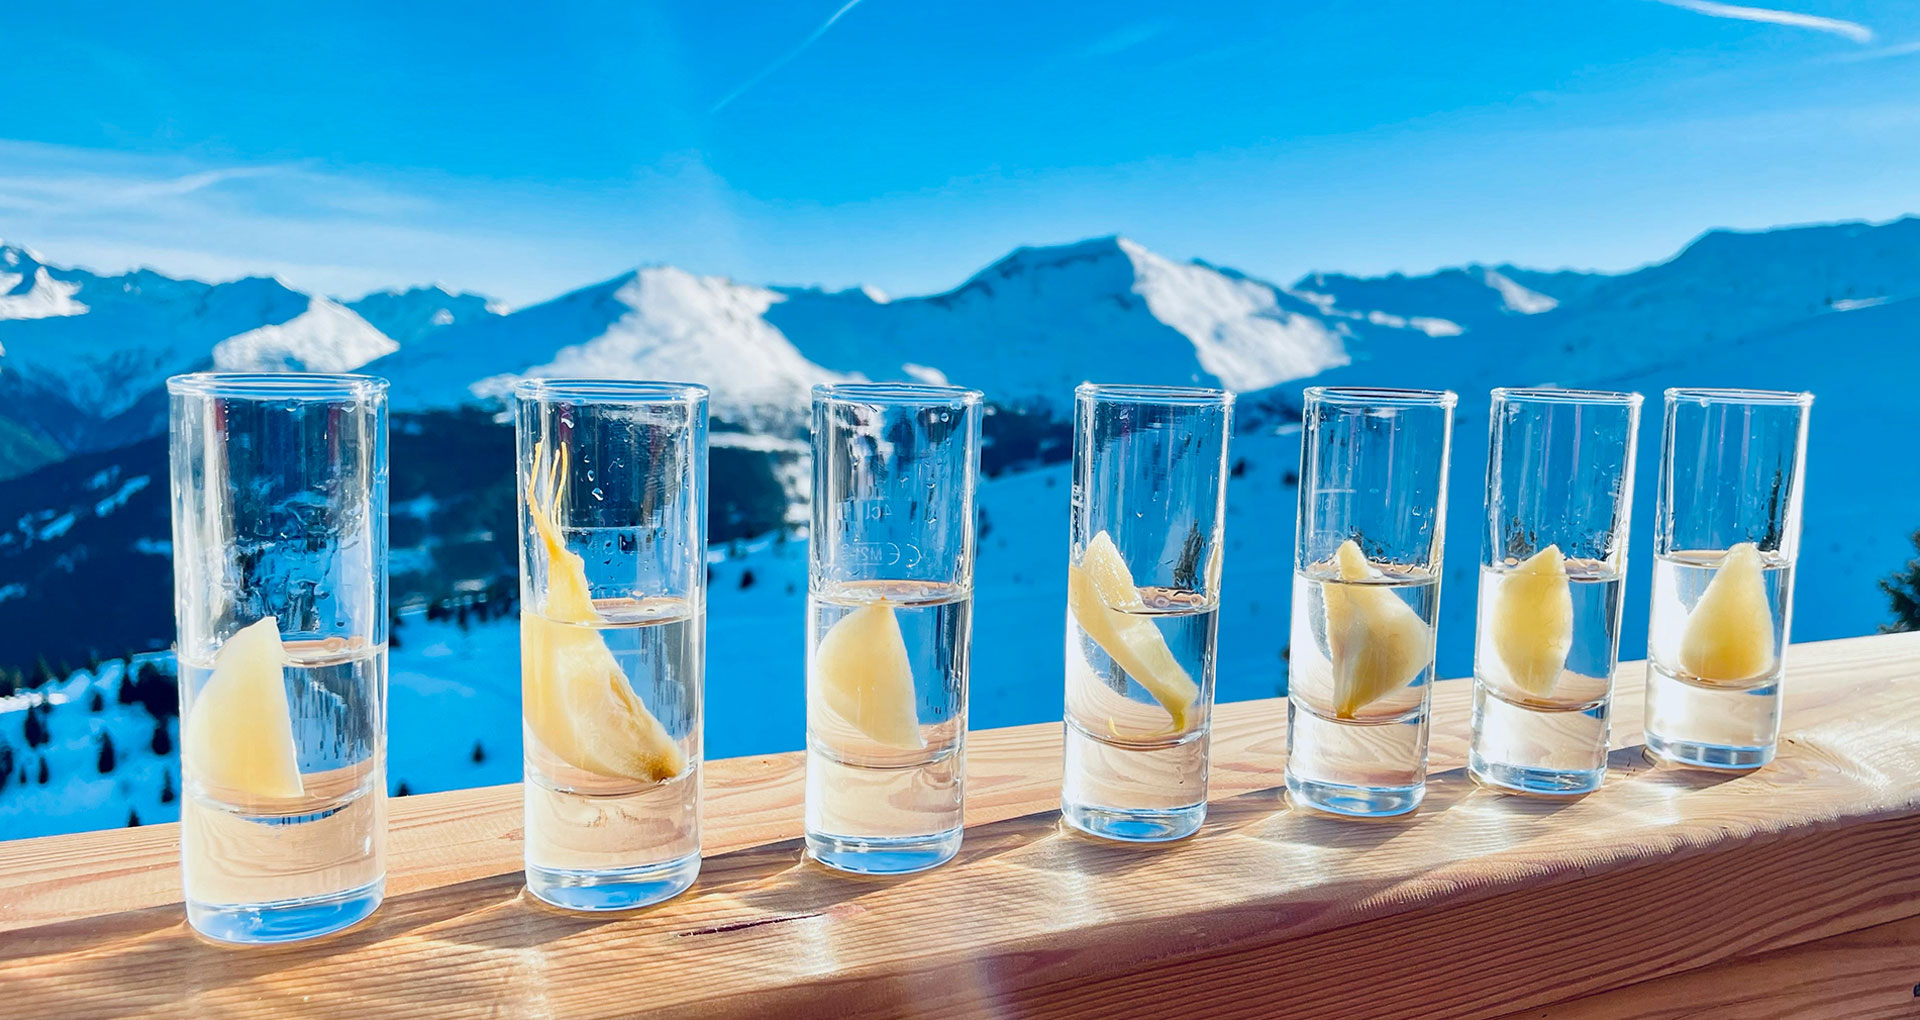 Shots of schnapps in front of snowy mountains